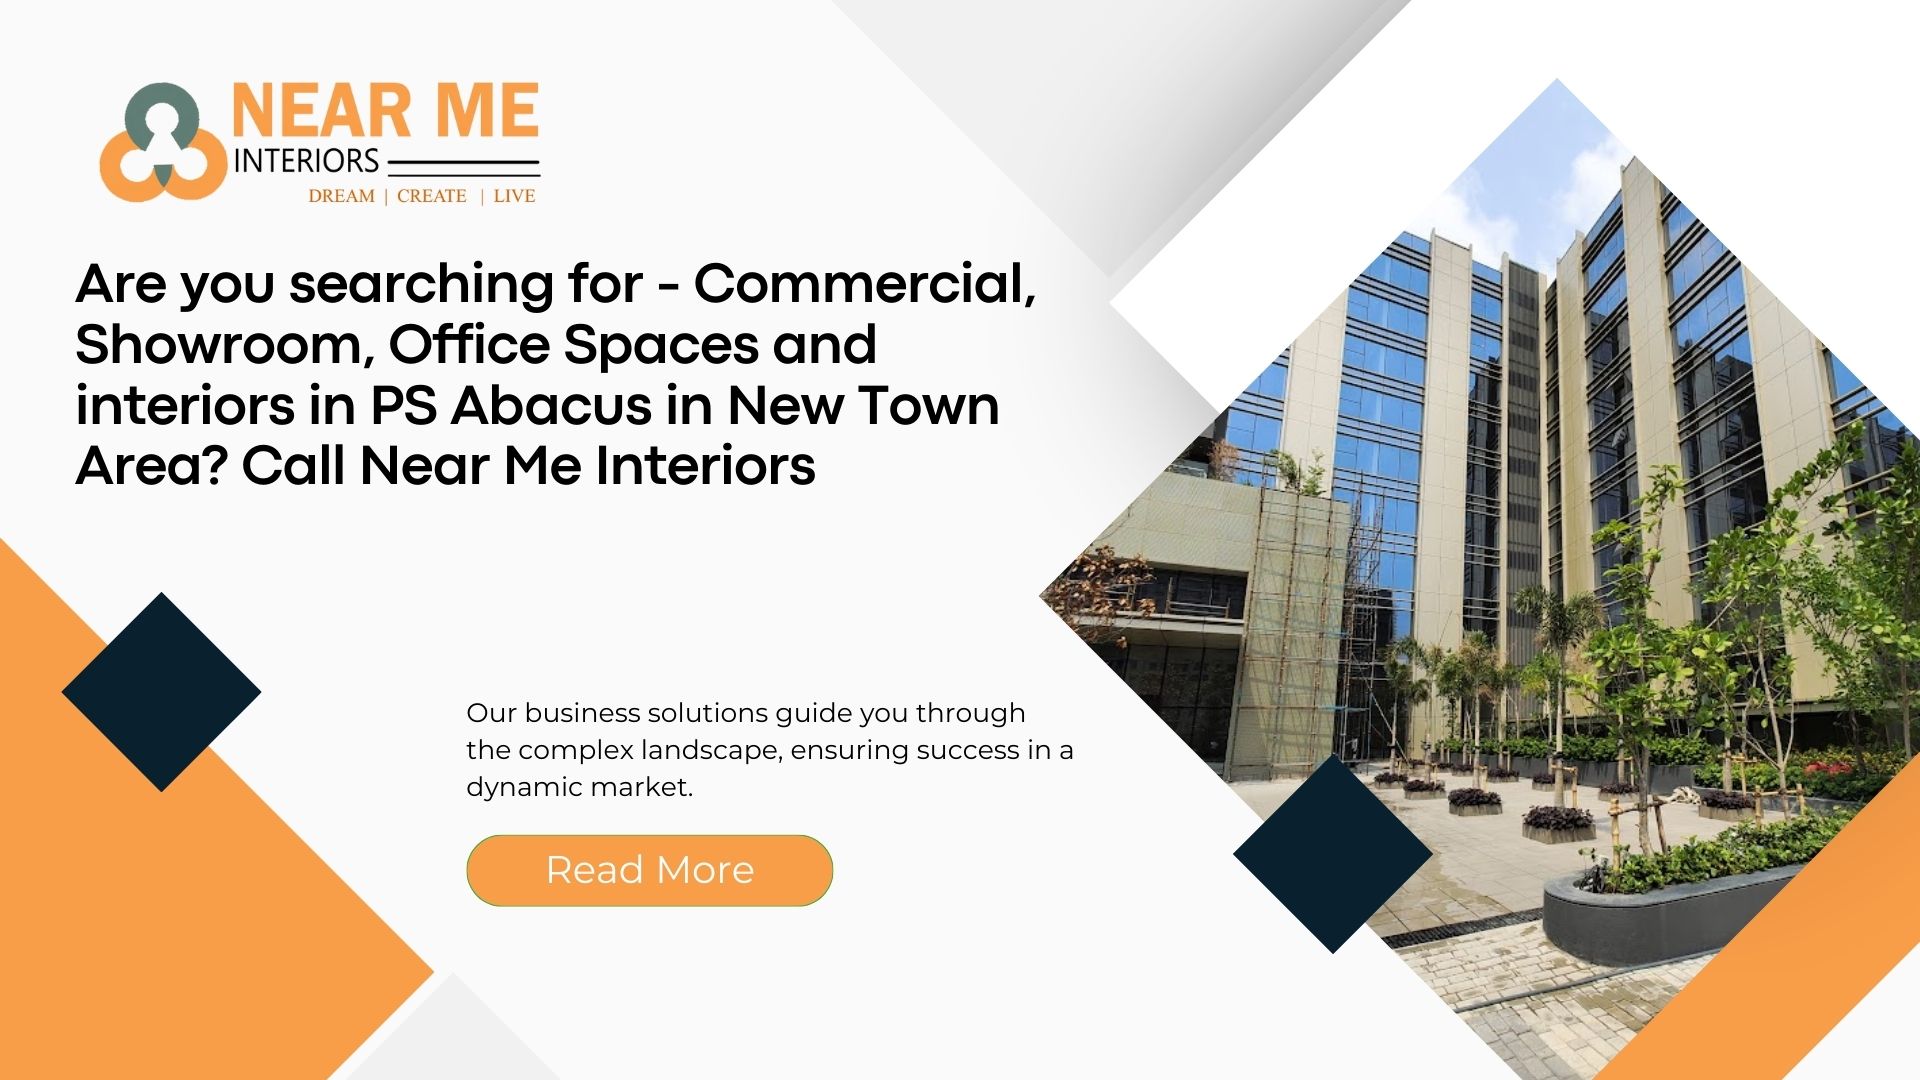 Are you searching for – Commercial, Showroom, Office Spaces and interiors in PS Abacus in New Town Area? Call Near Me Interiors